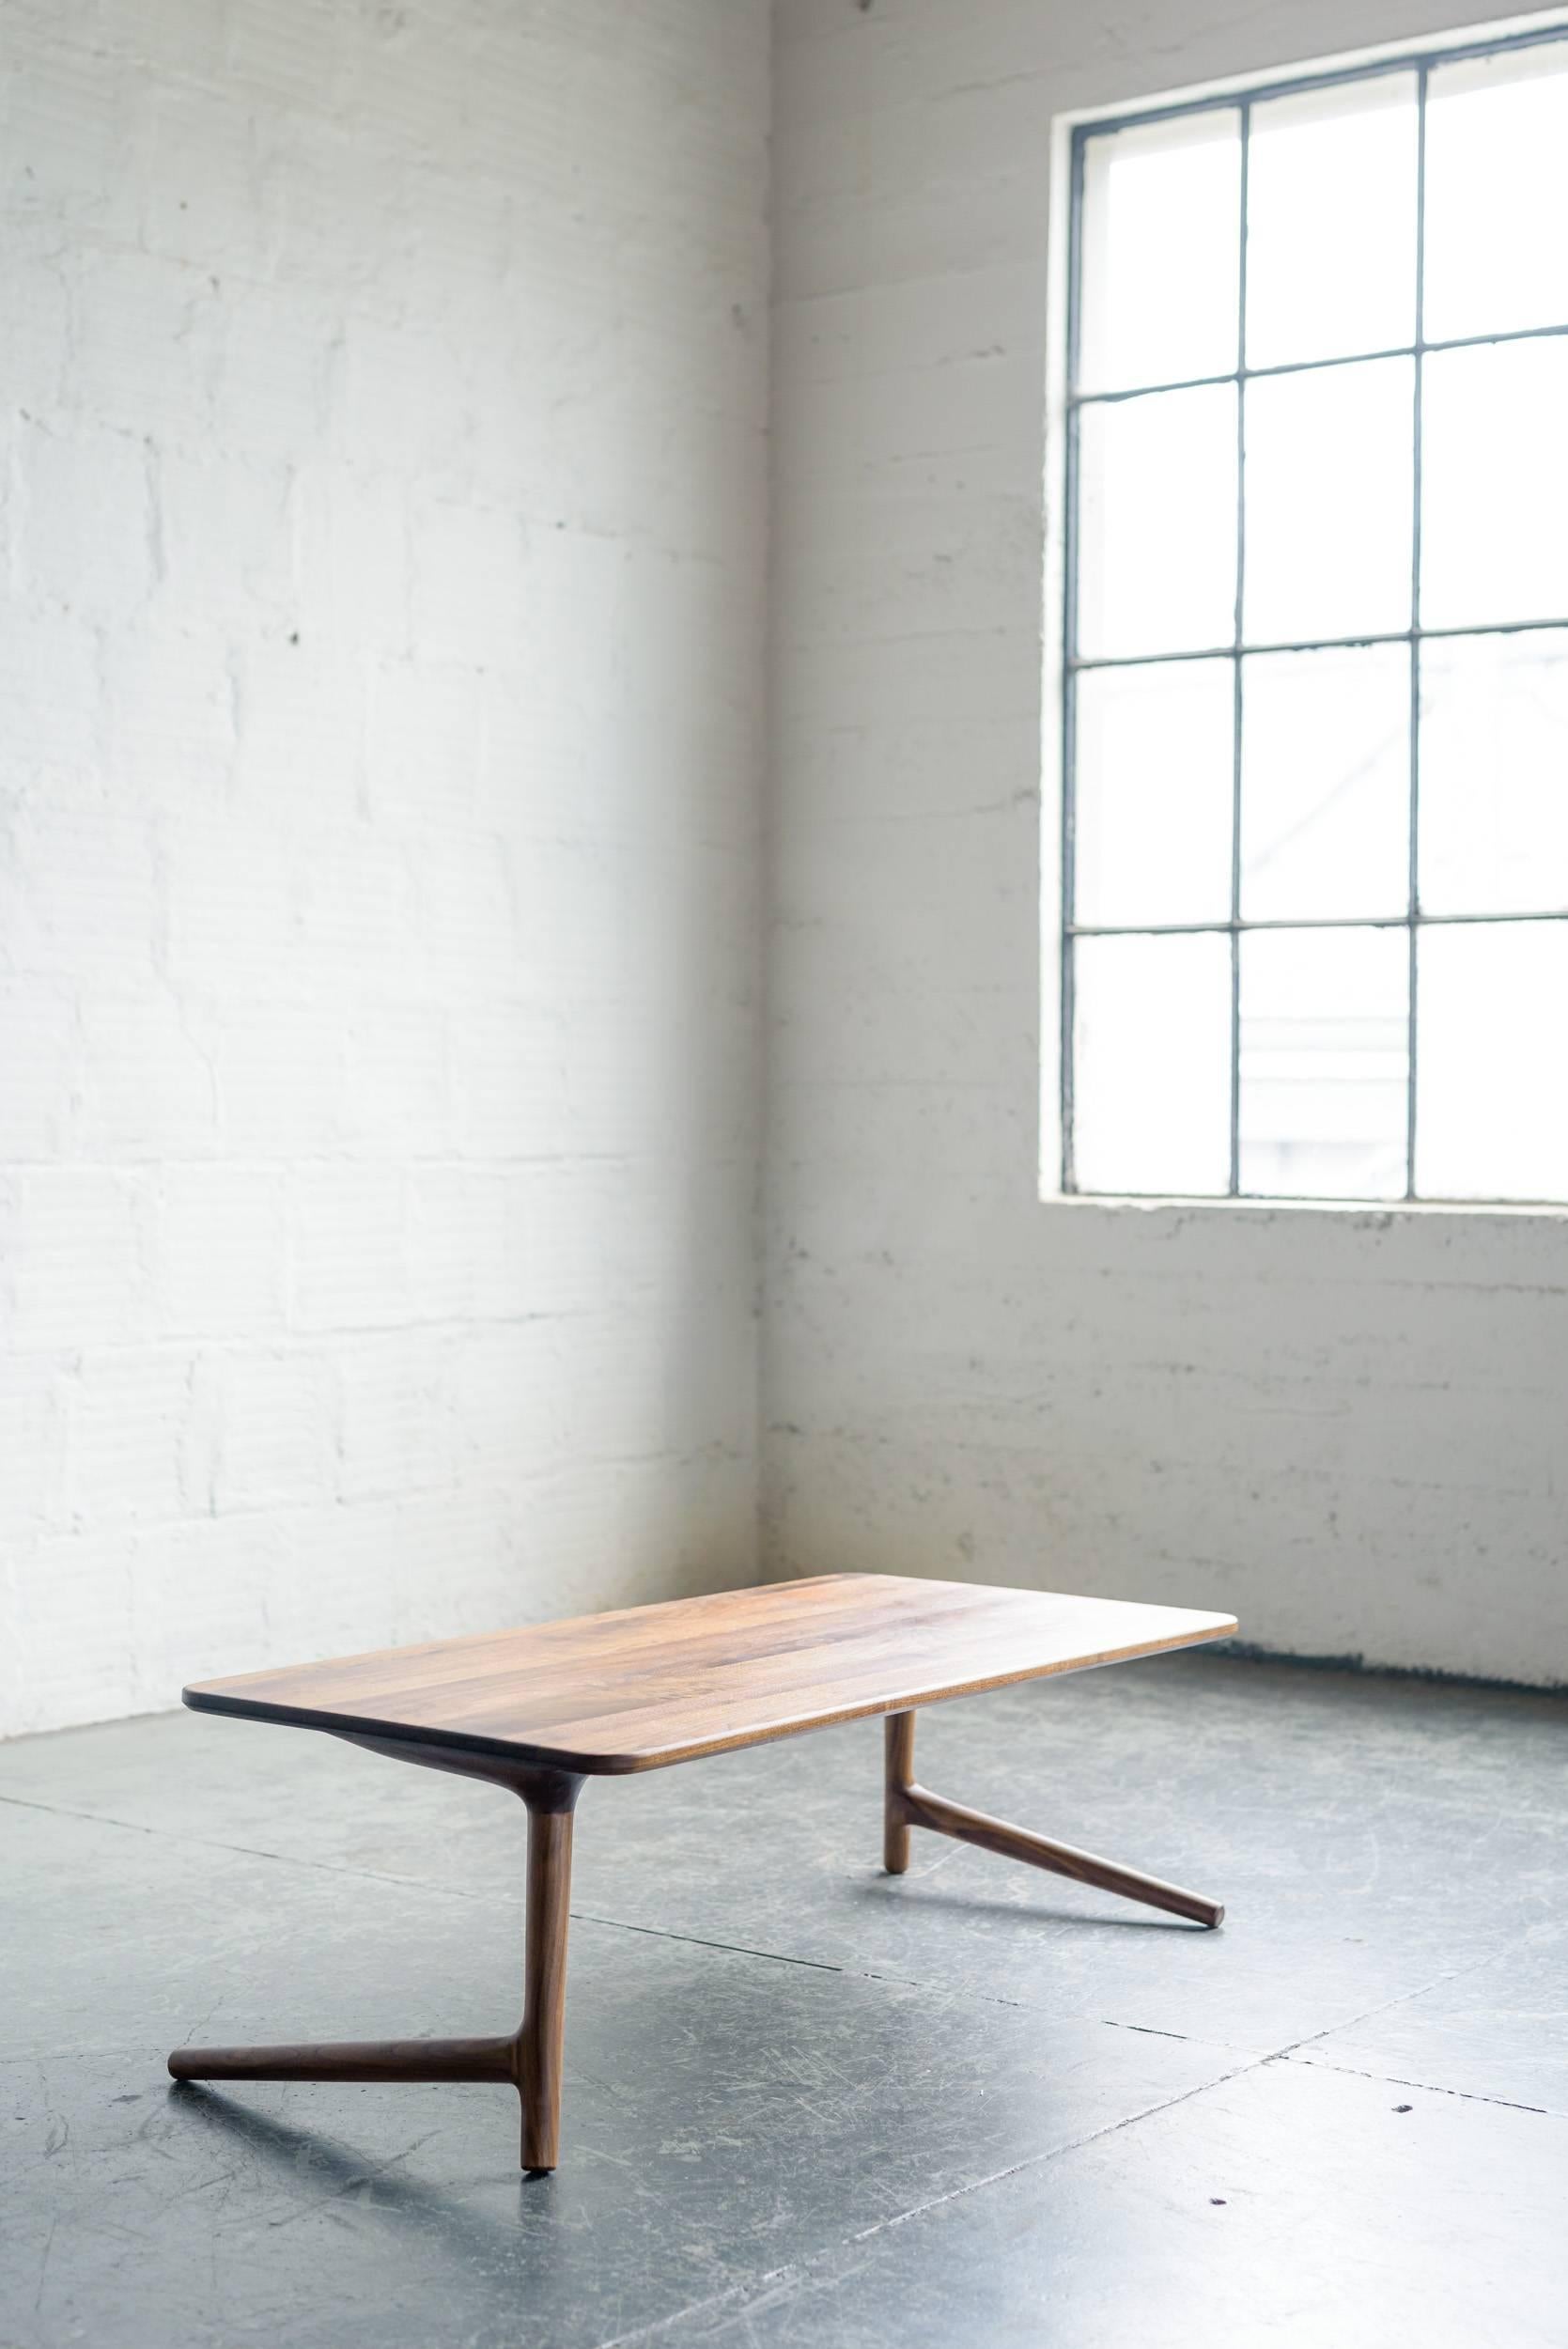 American Minimal Coffee Table made from Walnut Wood, by Fernweh Woodworking